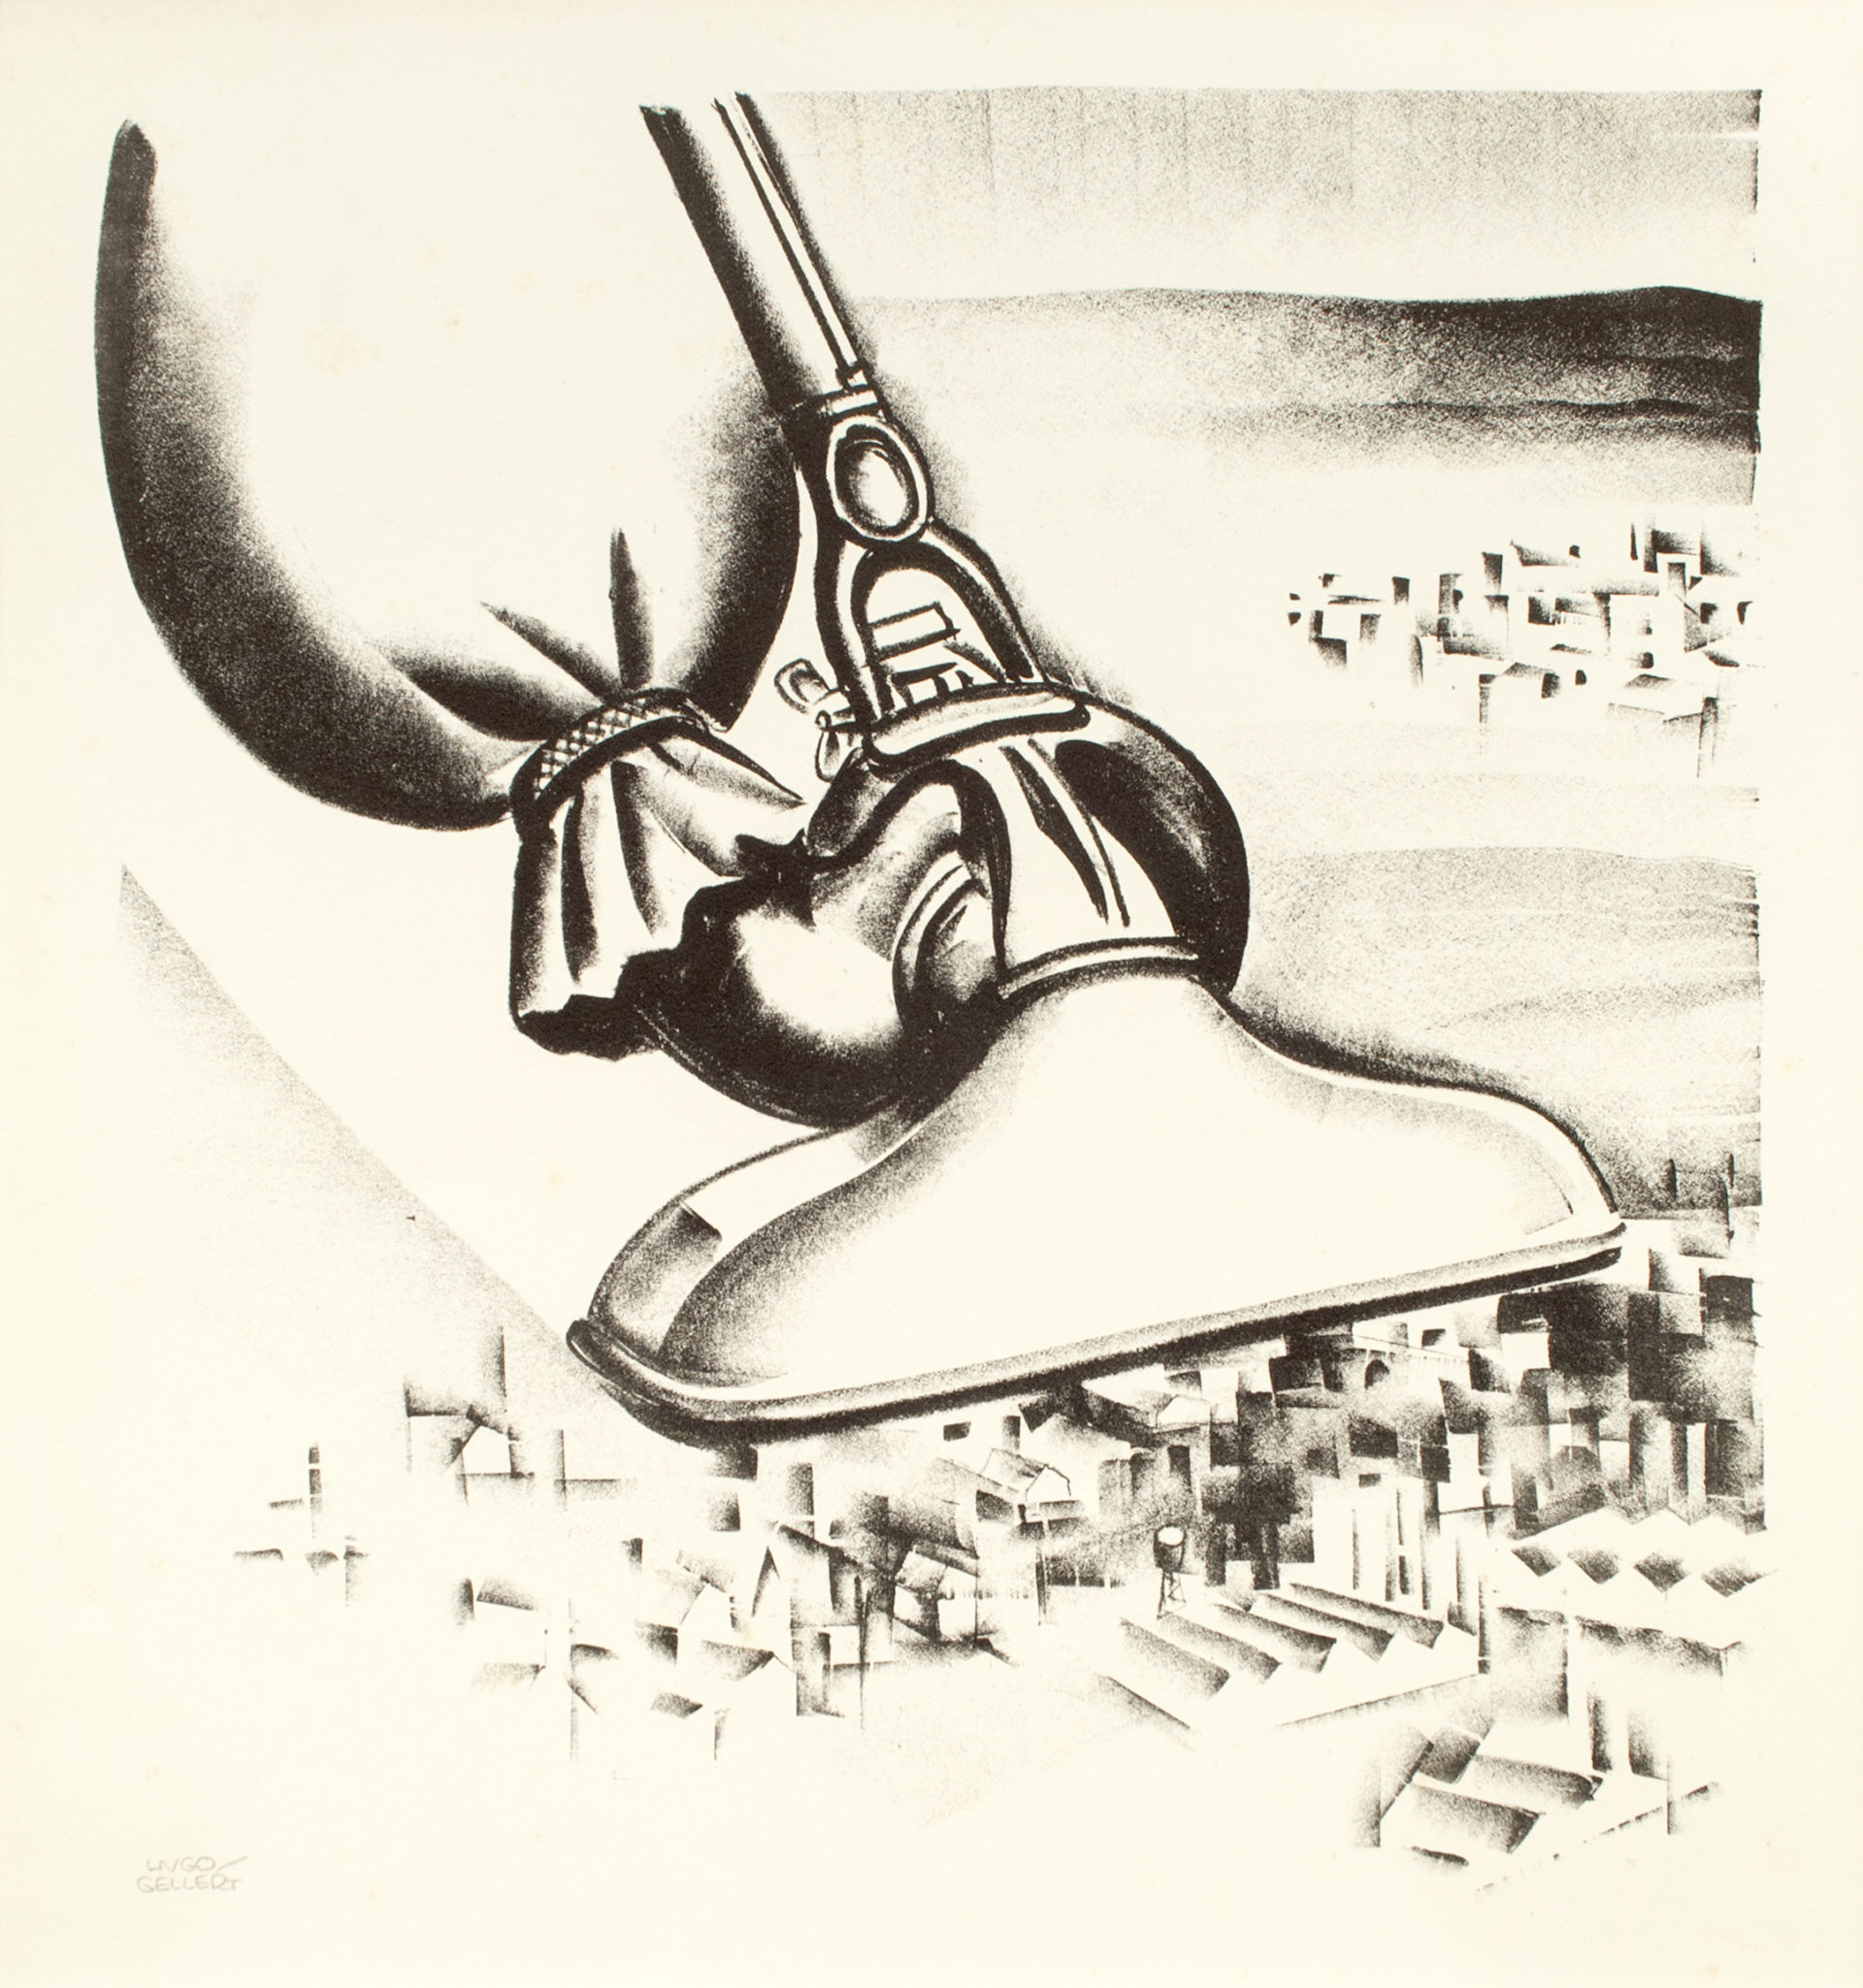 The Distribution of Wealth, 1936, Lithograph, 23 x 16 inches (58.4 x 40.6 cm), Edition of 50